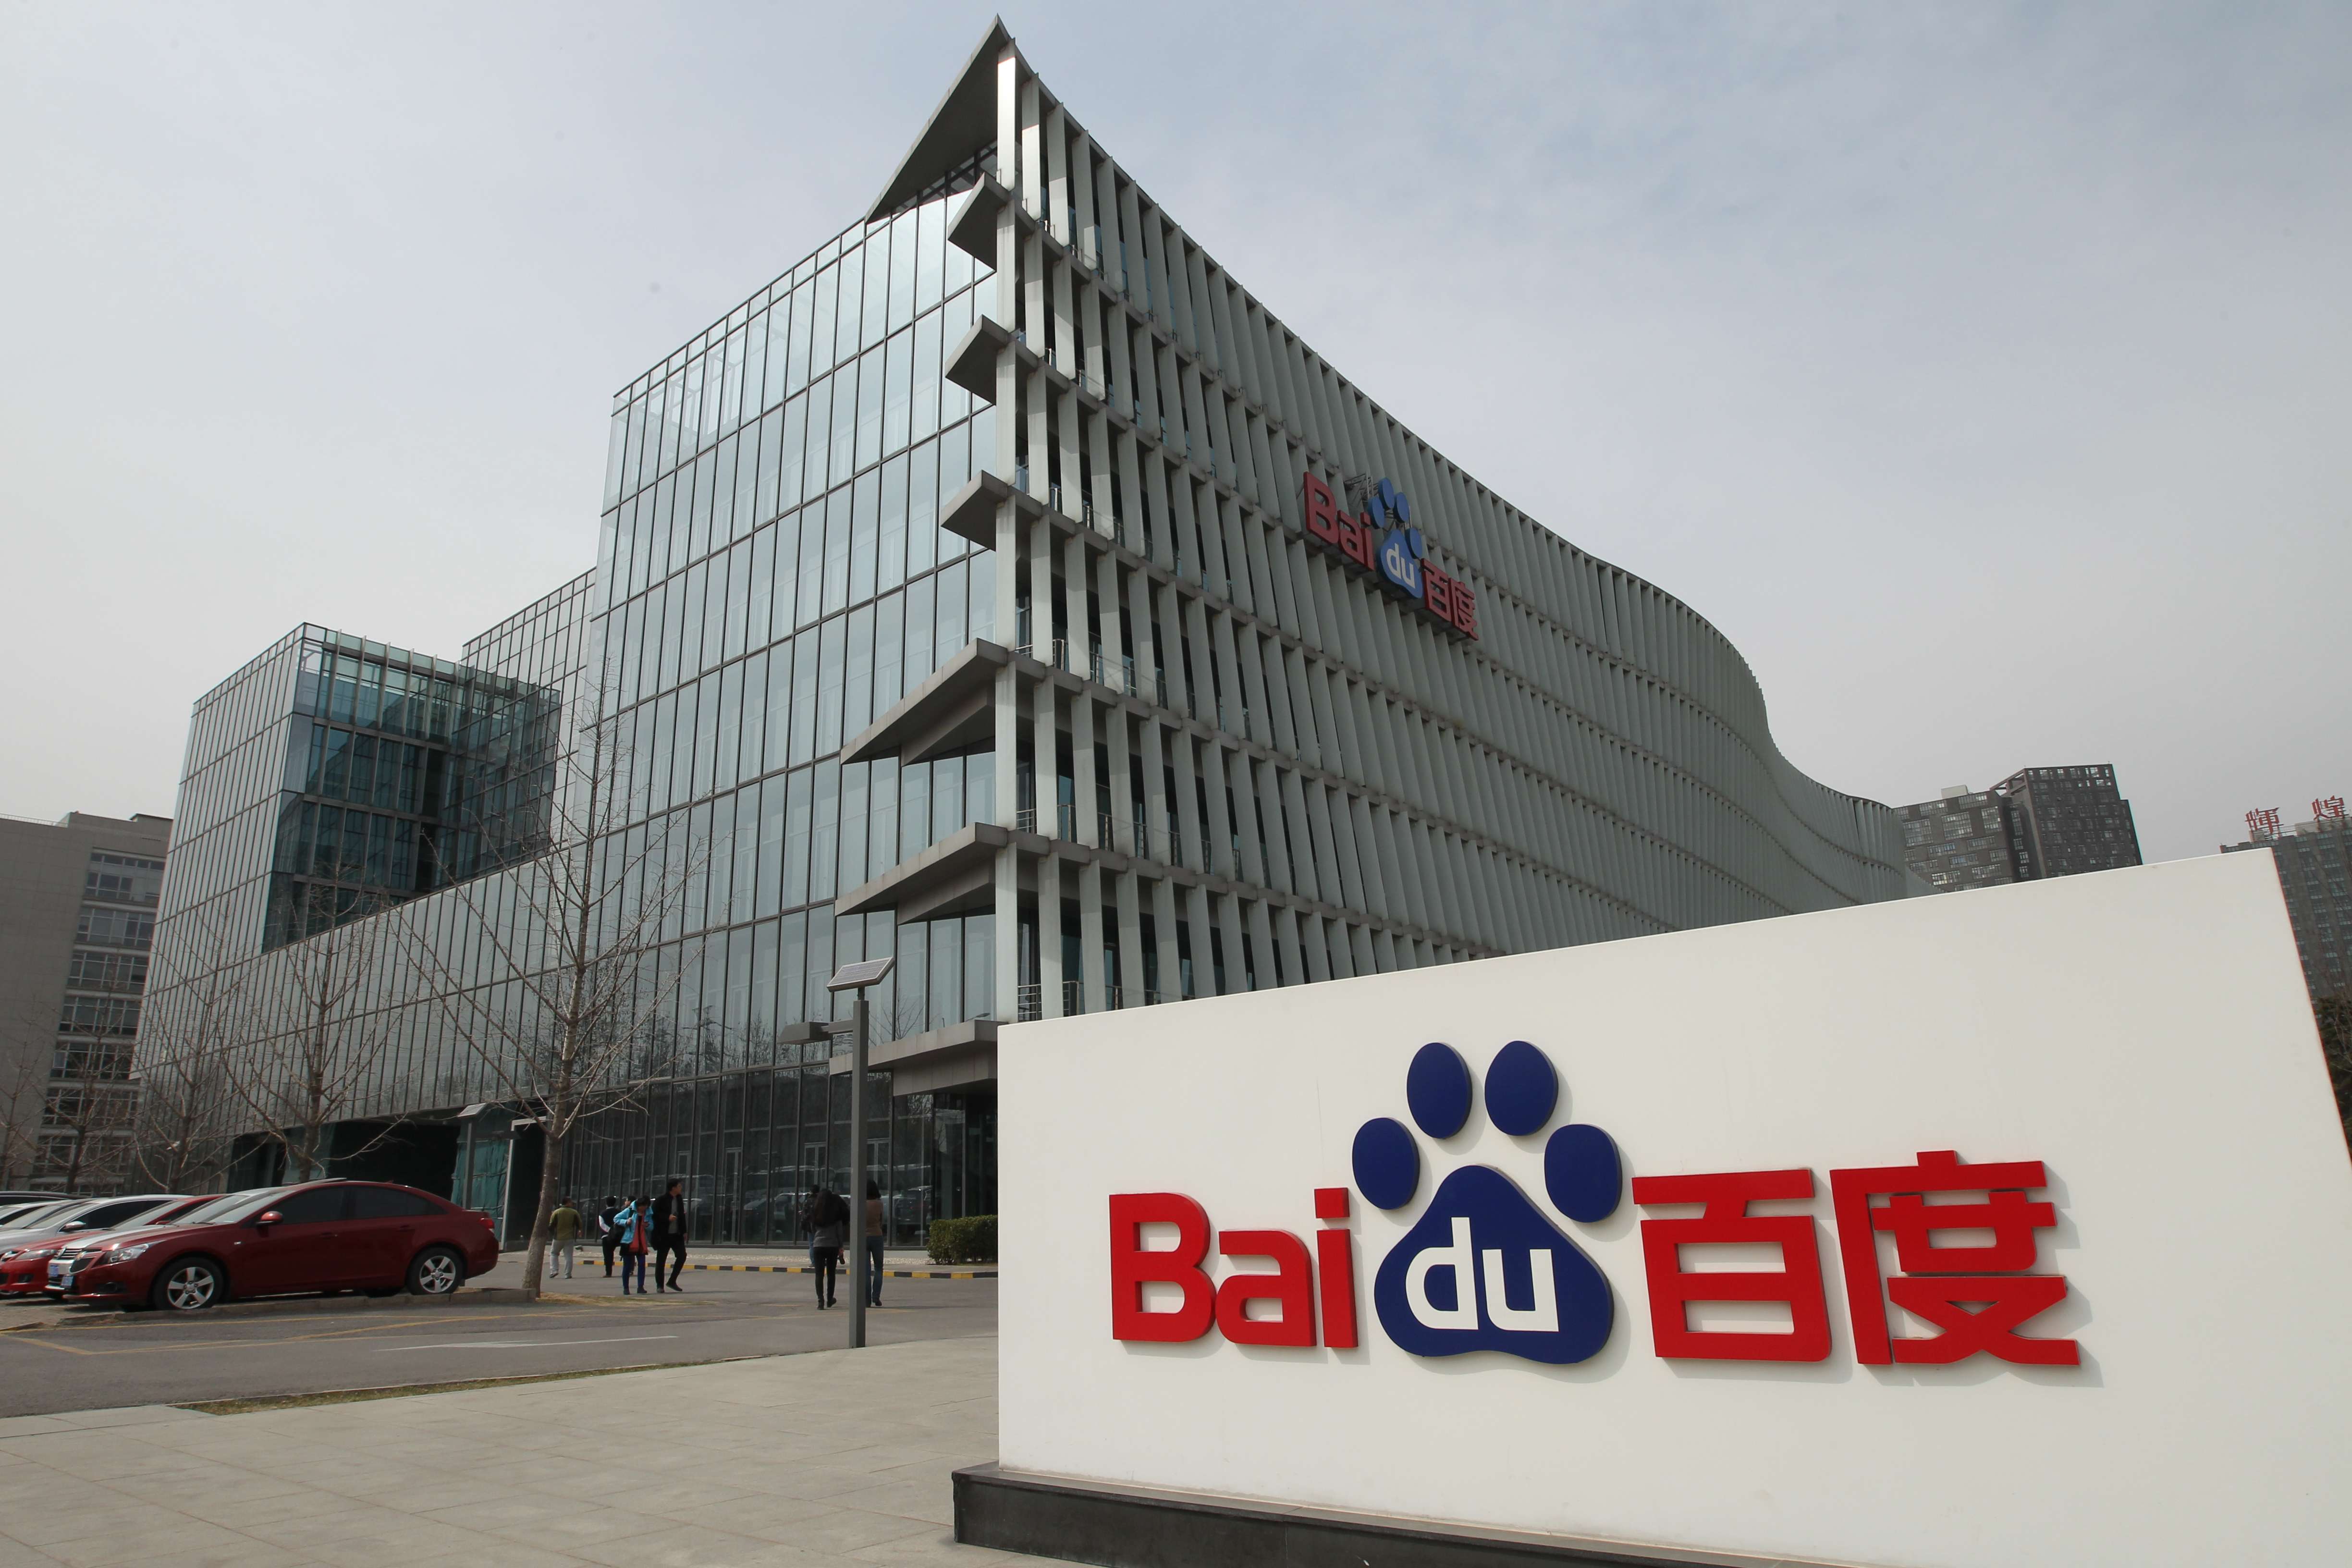 The government could impose stiff penalties on search giant Baidu in the fallout from an investigation, analysts say. Photo: Simon Song